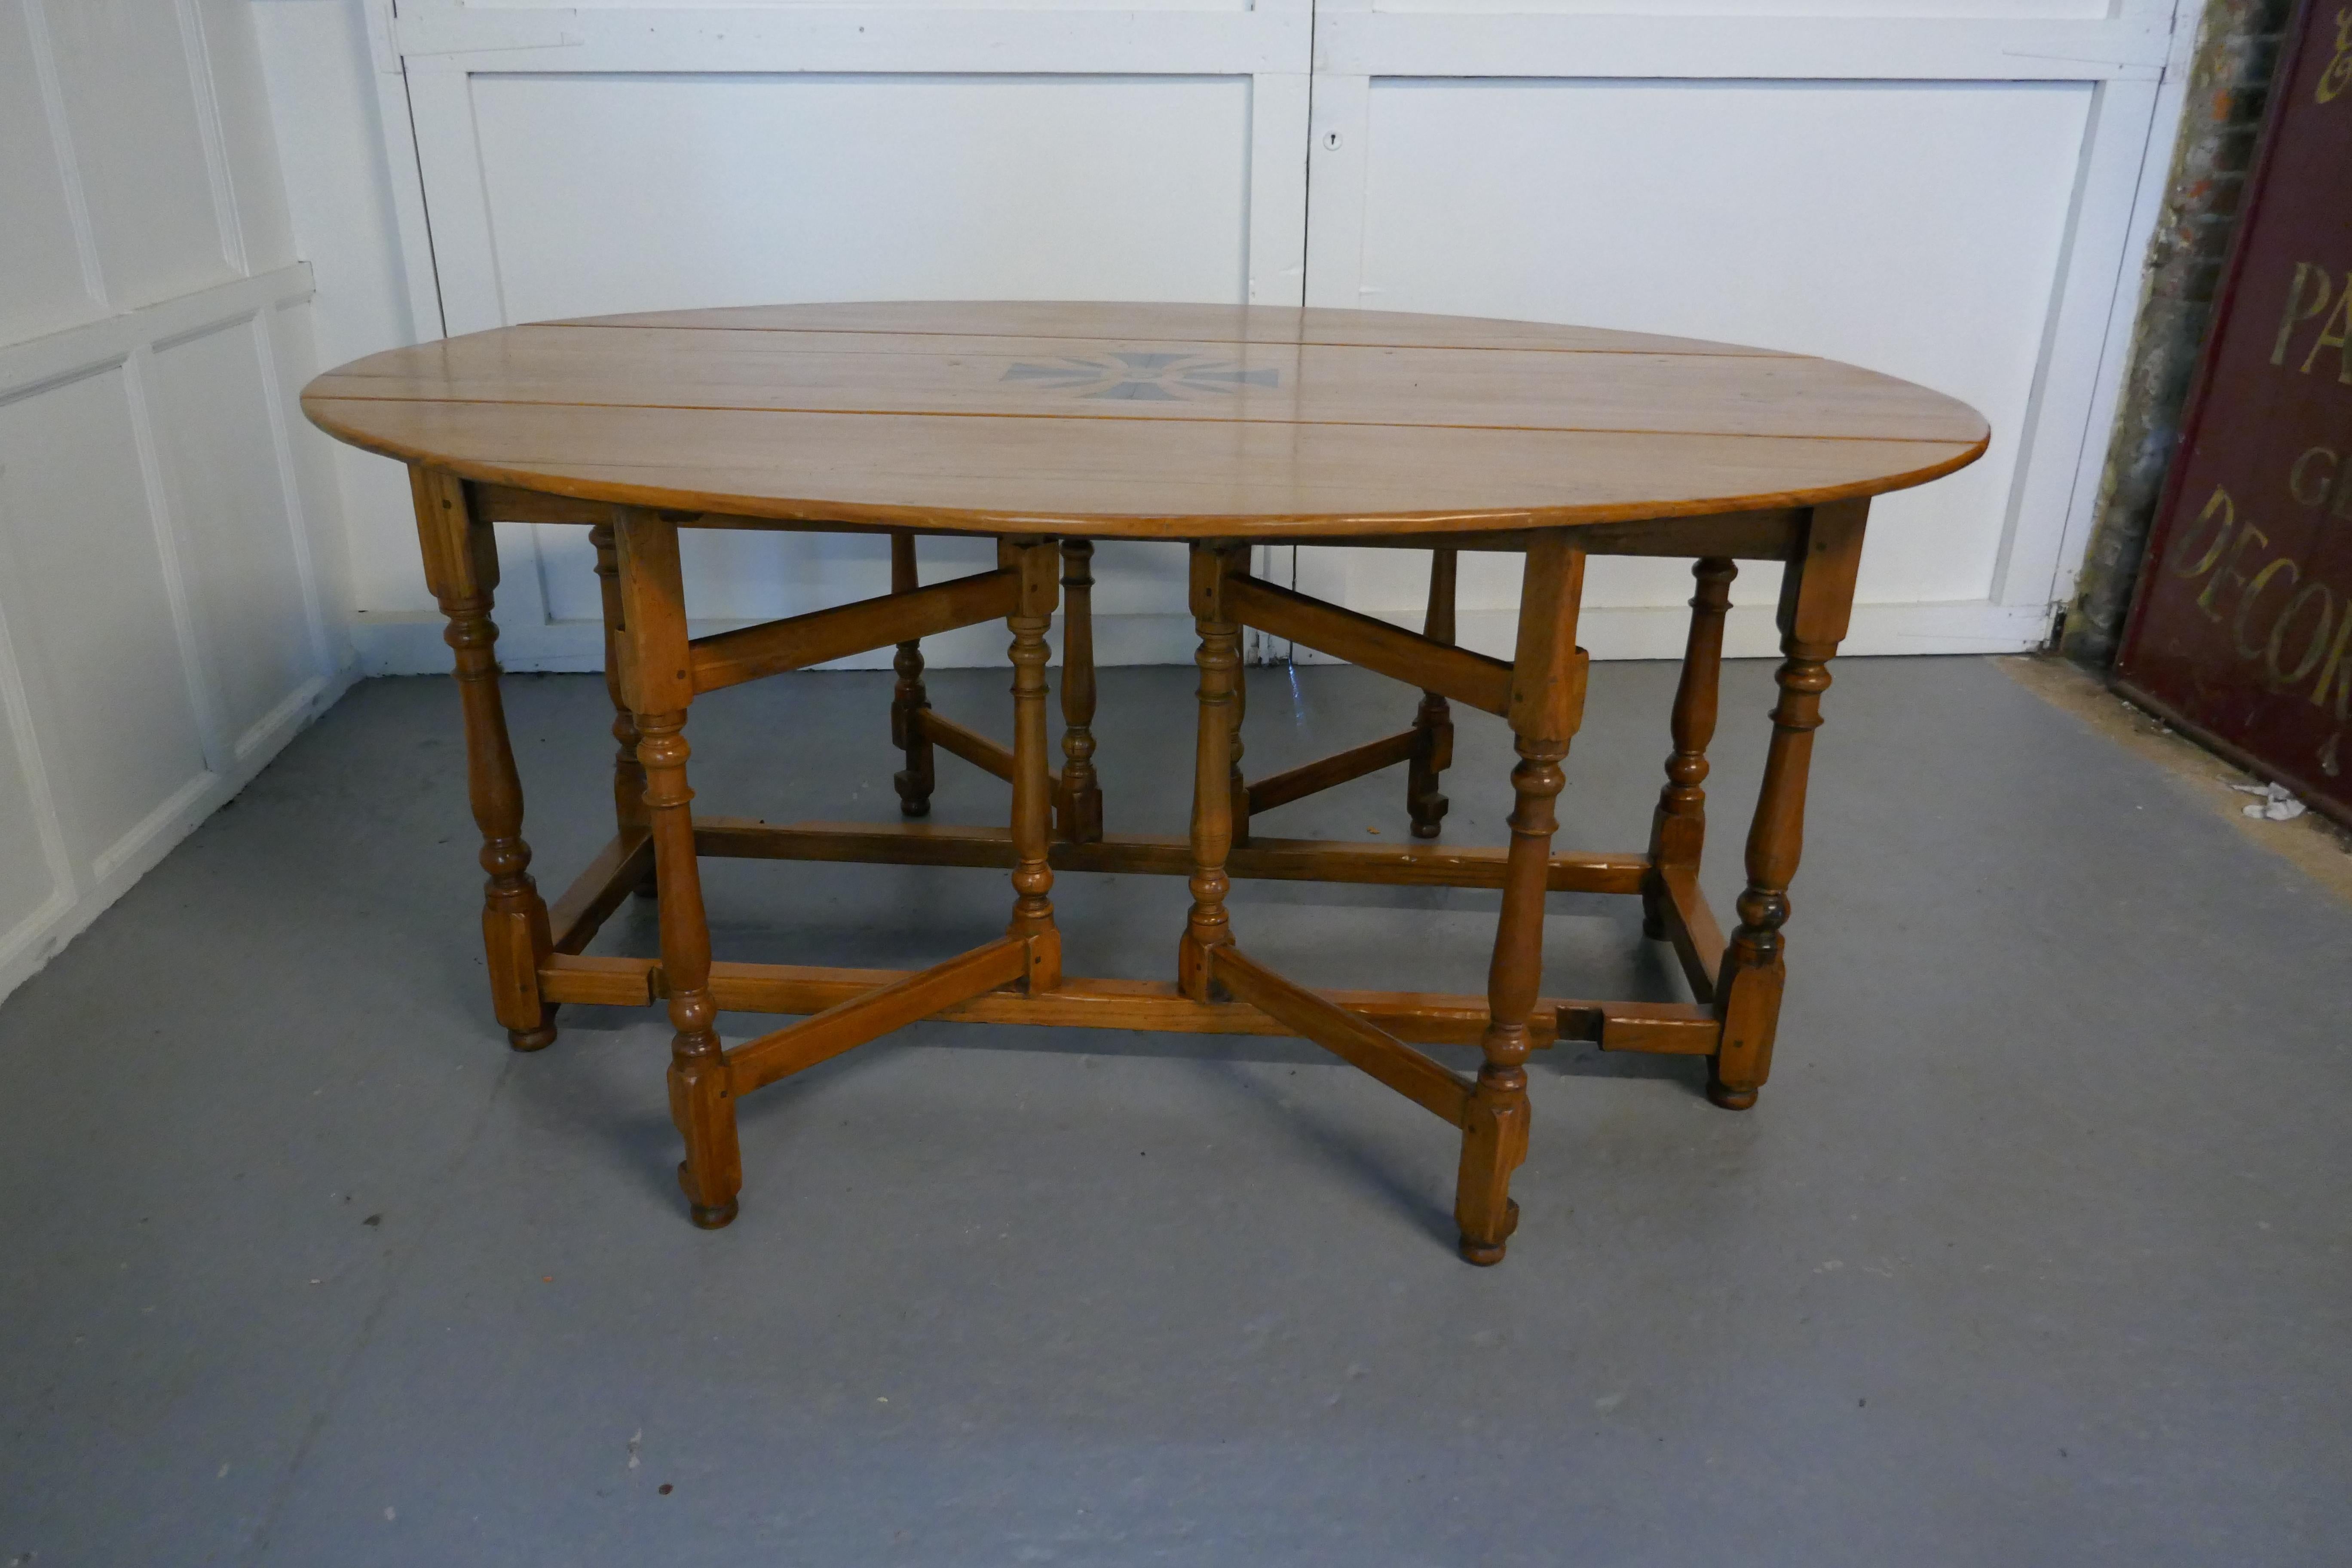 Large French Art Deco lemon wood gate leg wake table

This is a large table with double gate leg at each side to support the long deep leaves, there is a marquetry design in the centre, it has attractive turned legs and cross members
The table